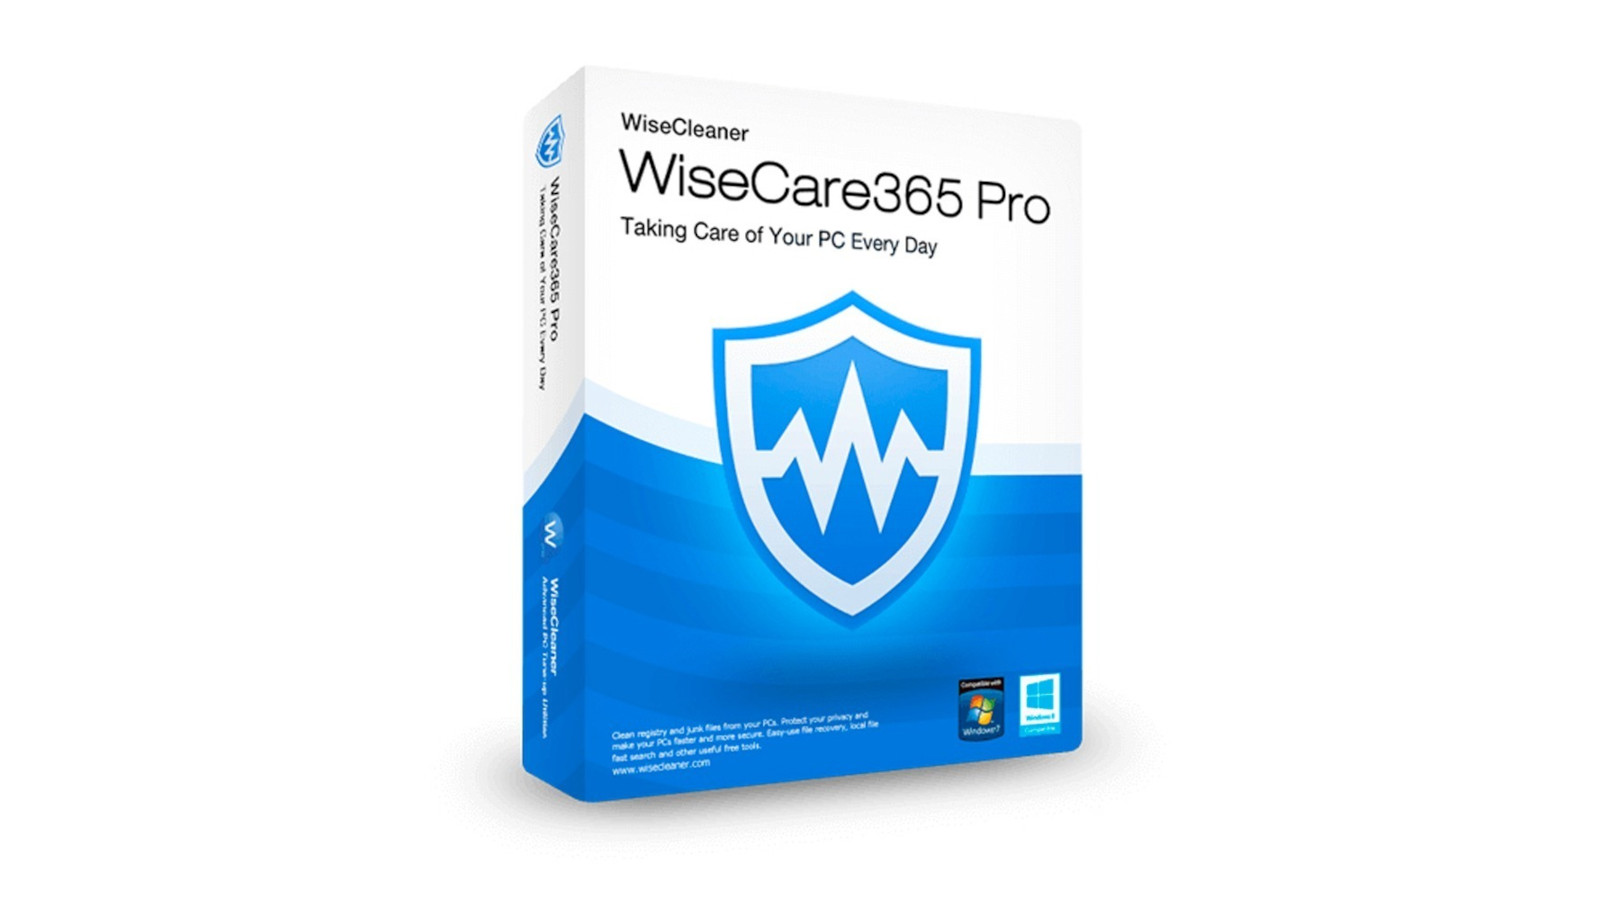 Wise Care 365 PRO CD Key (1 Year / 1 PC) [USD 18.05]